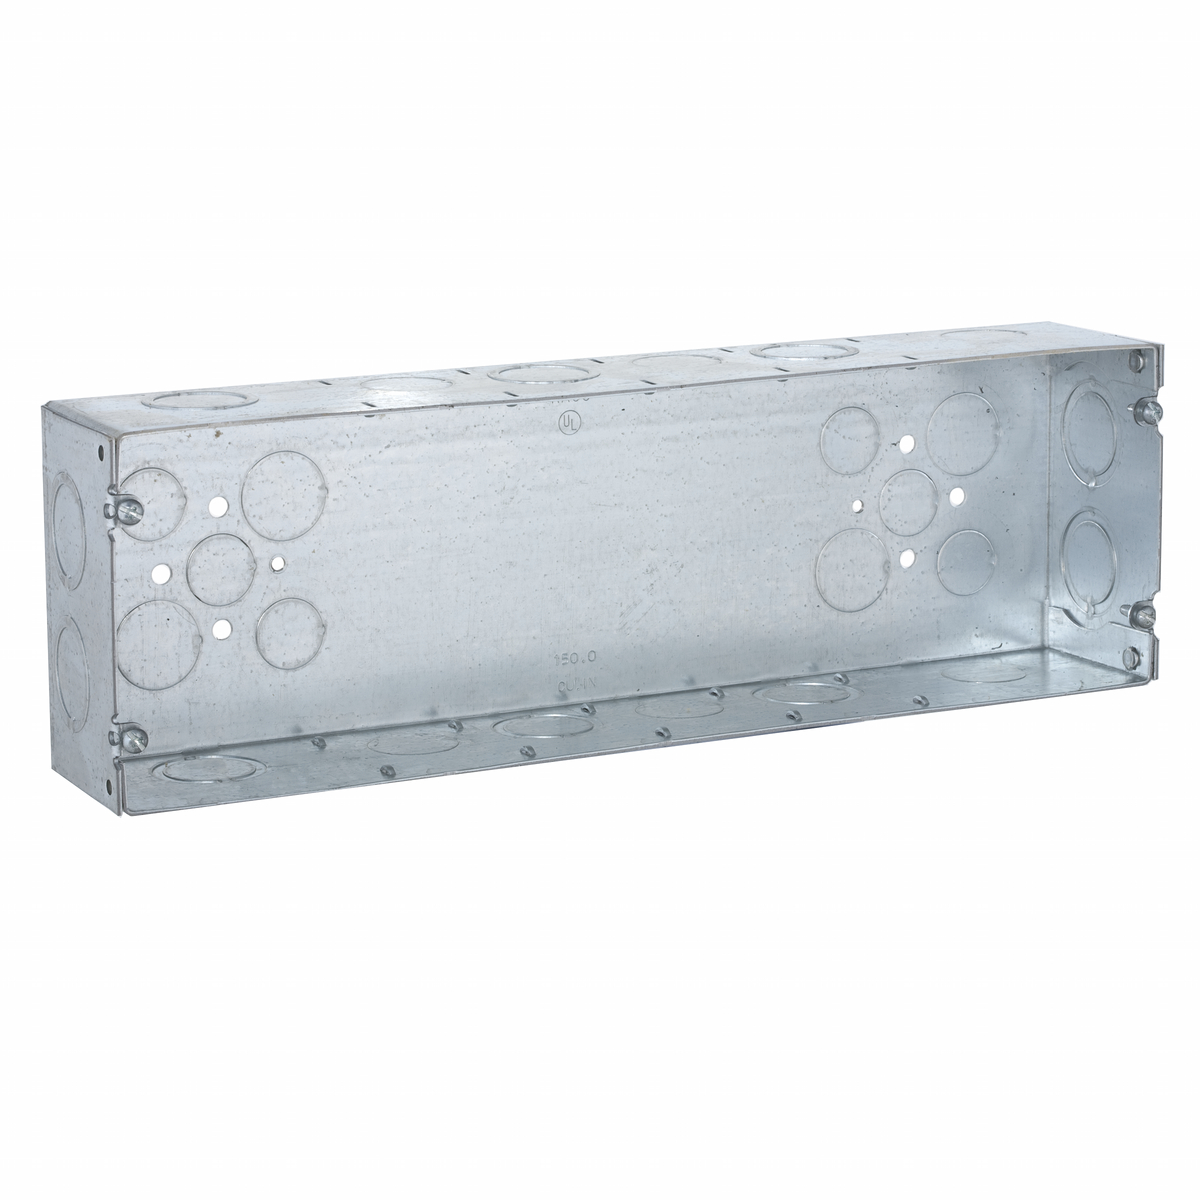 Gang Boxes, 2-1/2 In. Deep - Welded with Conduit KO's, 6-Gang